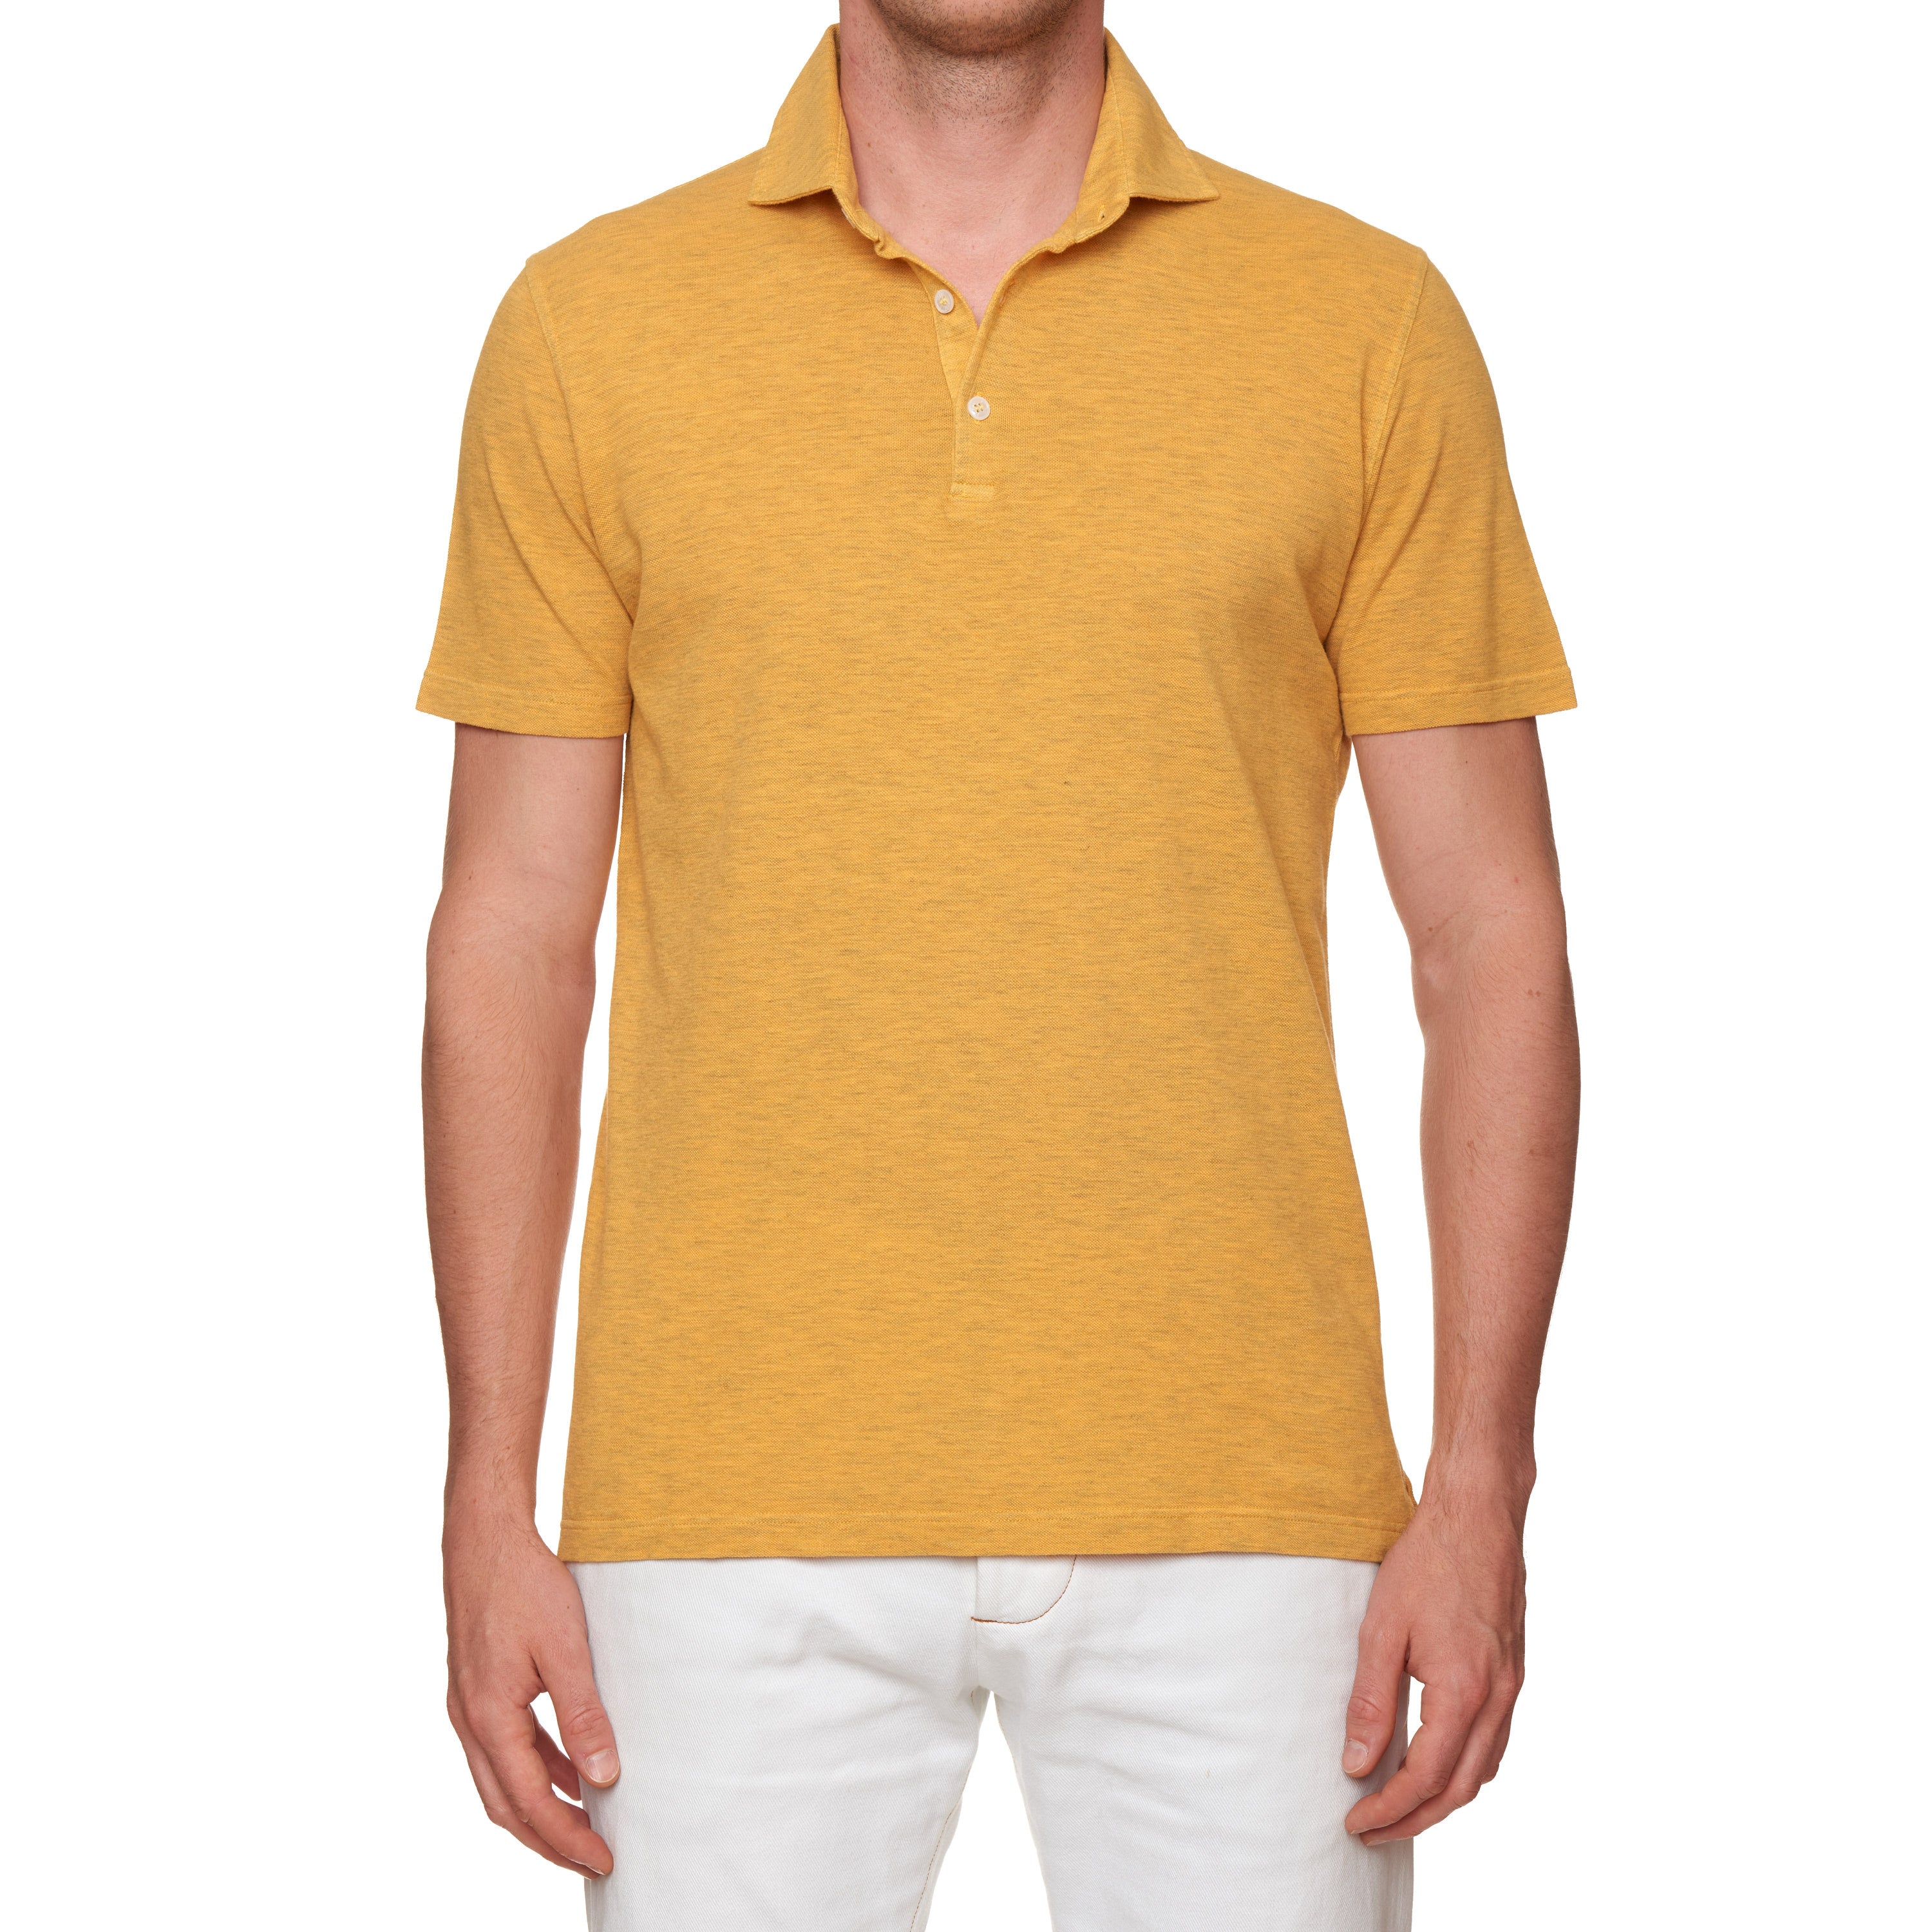 FEDELI "Tommy" Heather Yellow Cotton Short Sleeve Pique Polo Shirt 50 NEW US M